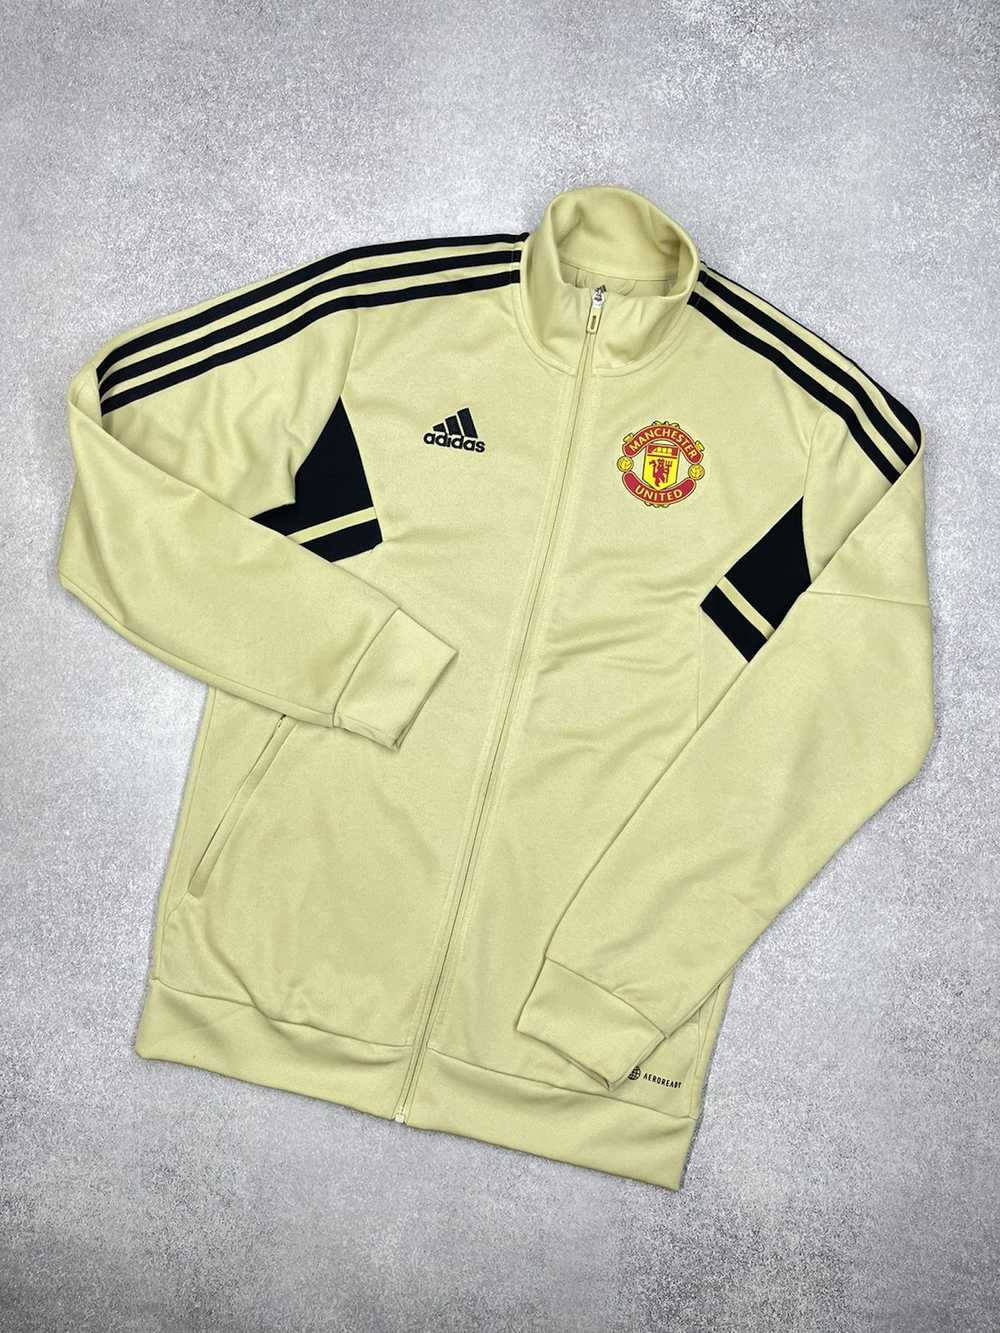 Adidas × Manchester United × Soccer Jersey Mens A… - image 1